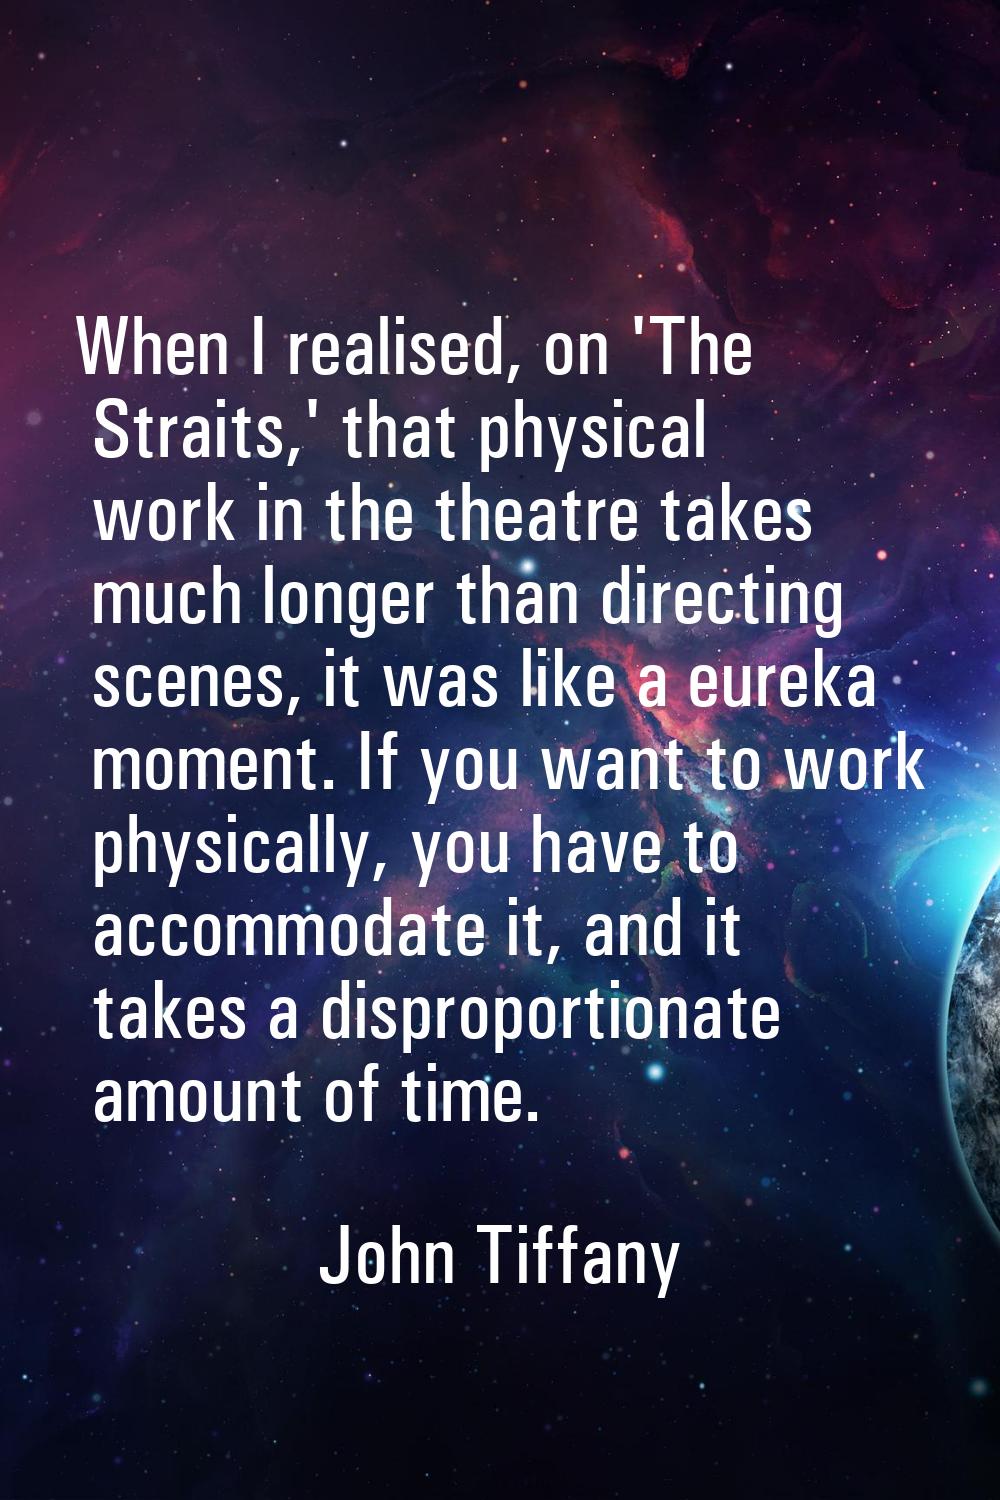 When I realised, on 'The Straits,' that physical work in the theatre takes much longer than directi